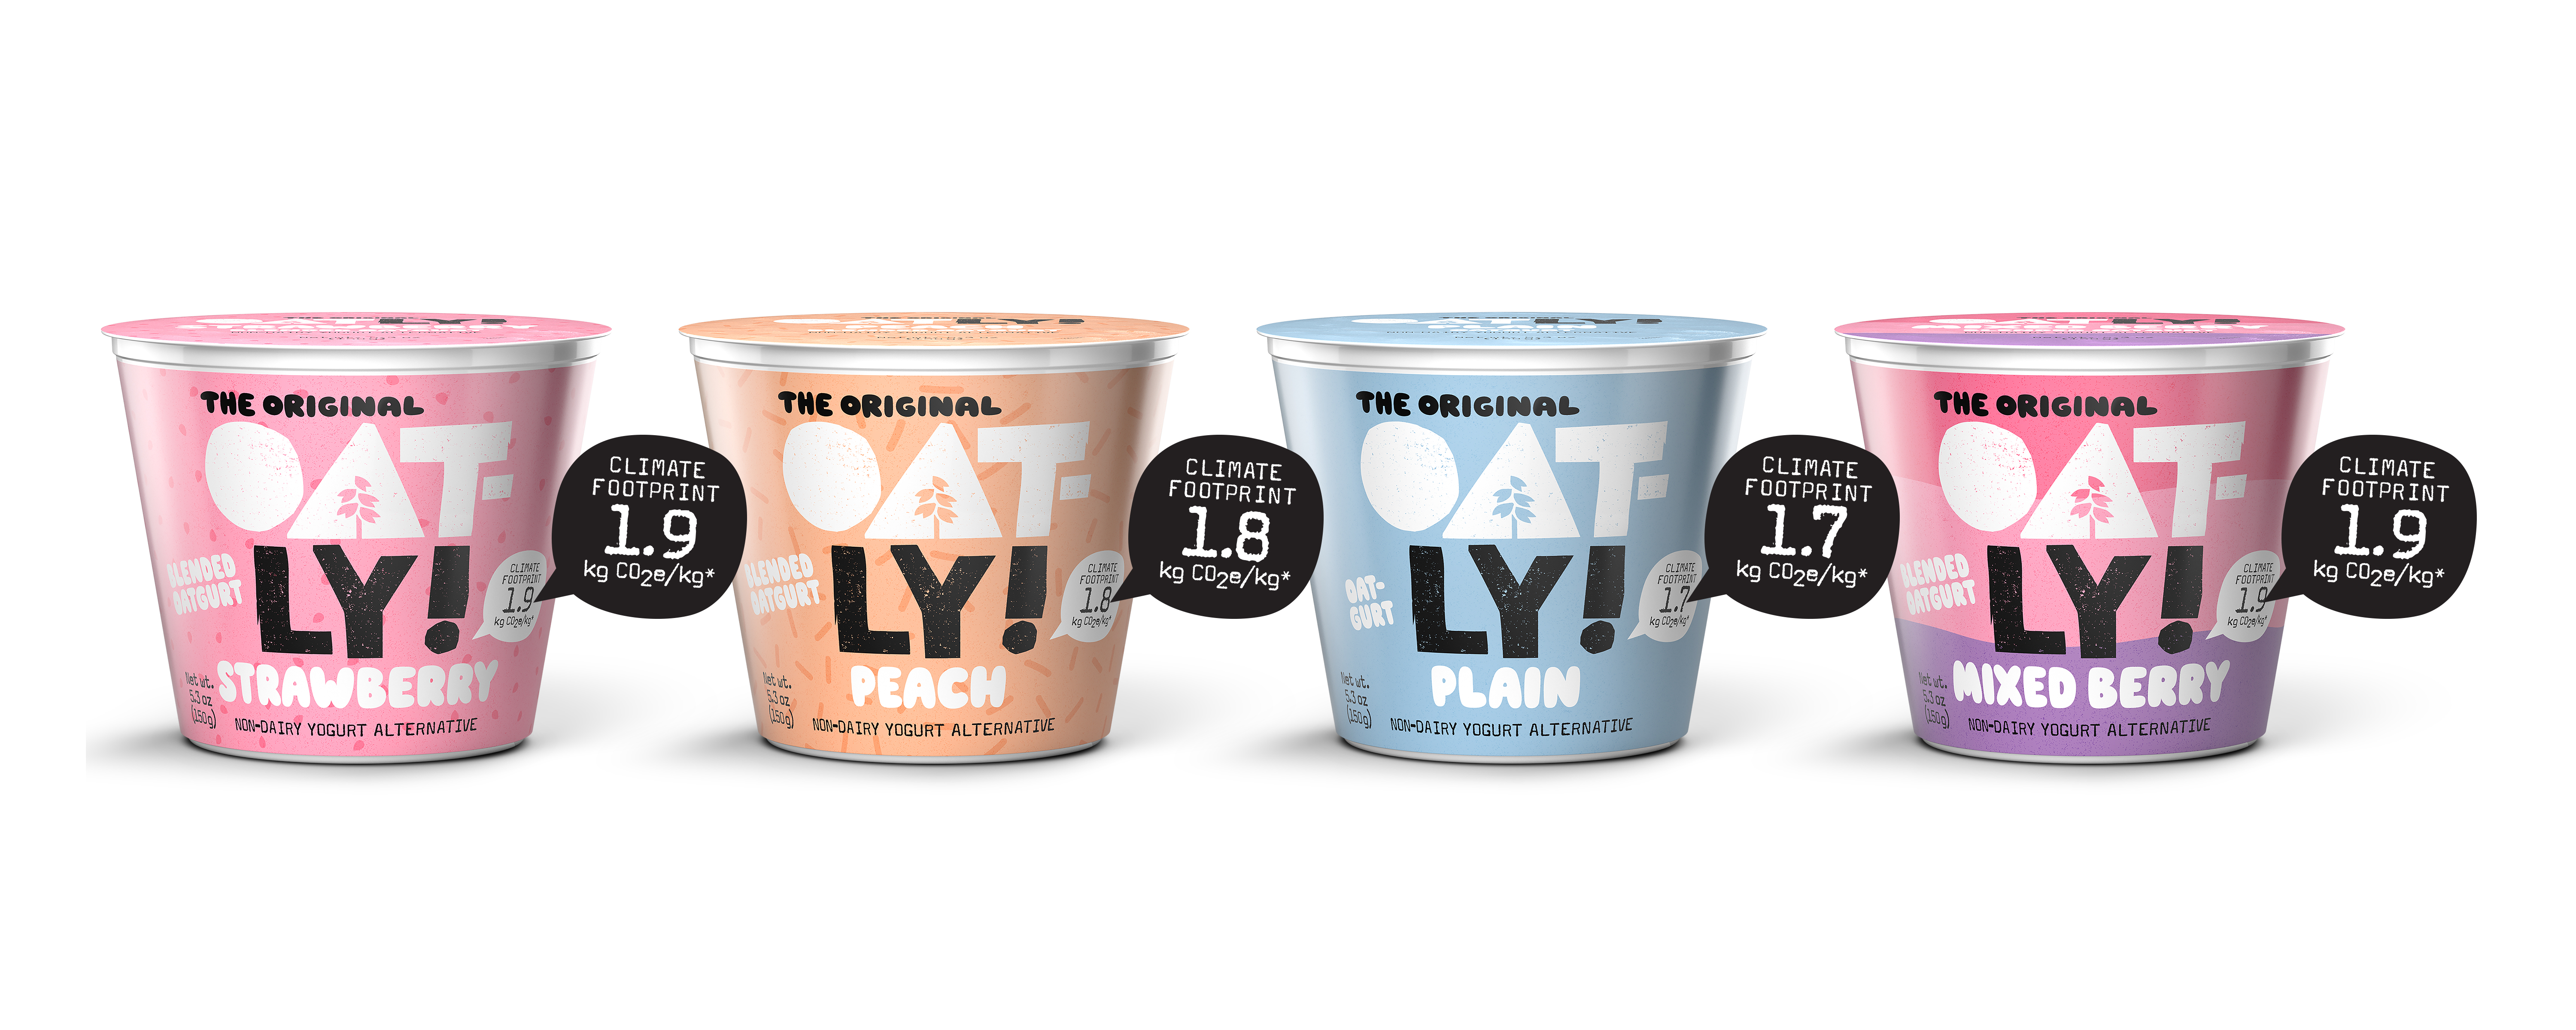 Oatly&#039;s Newly Reformulated Oatgurt Line, Now Featuring Climate Footprint Labels